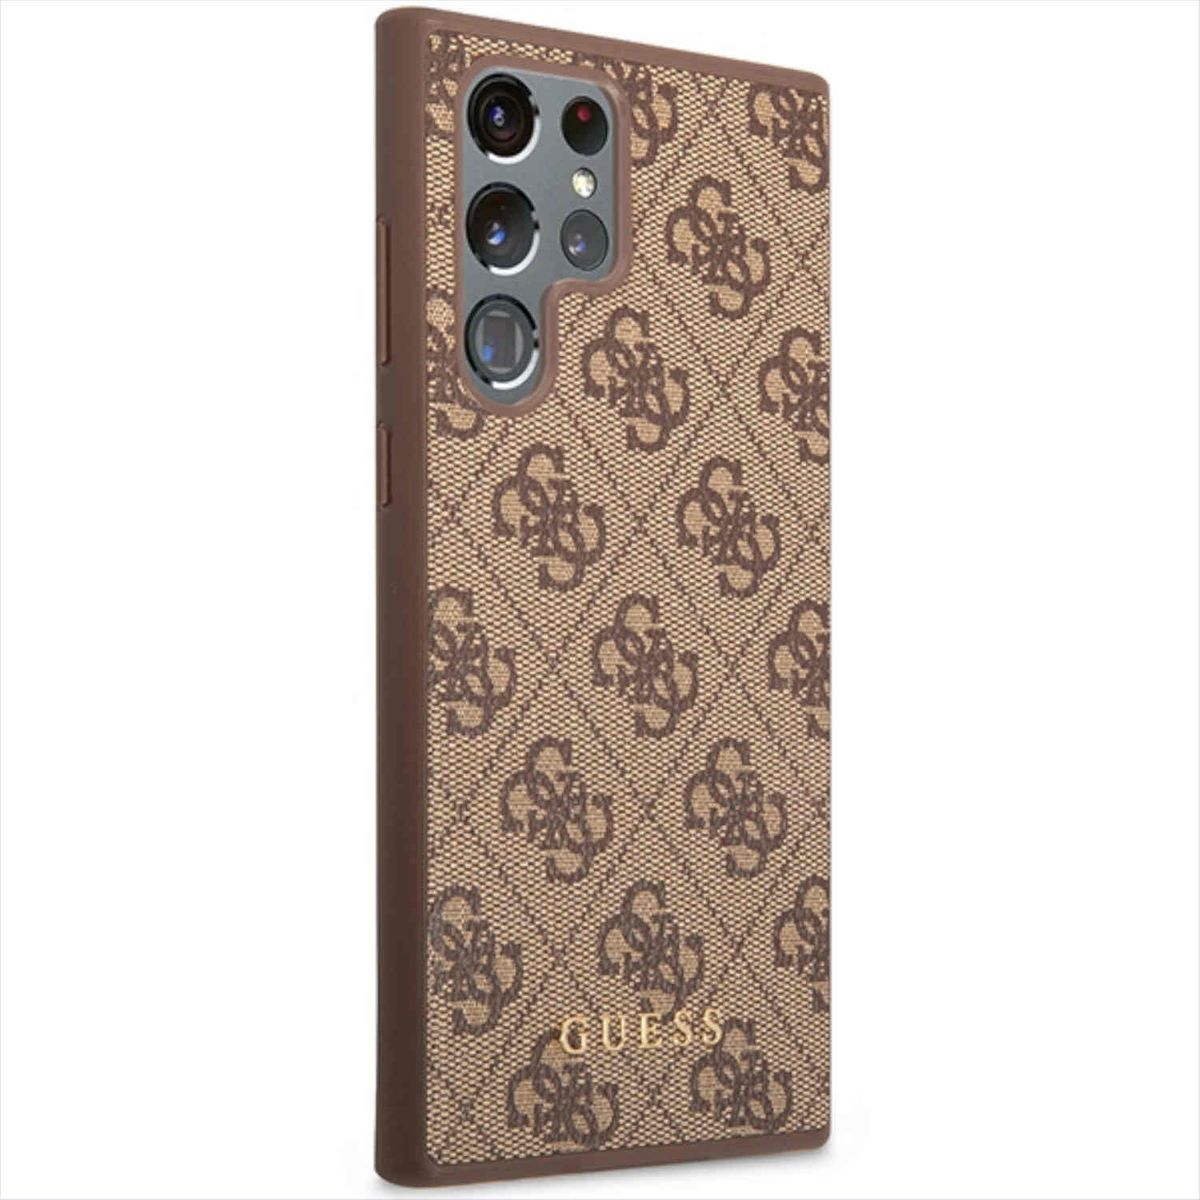 S23 GUESS Hülle, 4G Design Galaxy Gold Metal Collection Logo Backcover, Braun Samsung, Ultra,